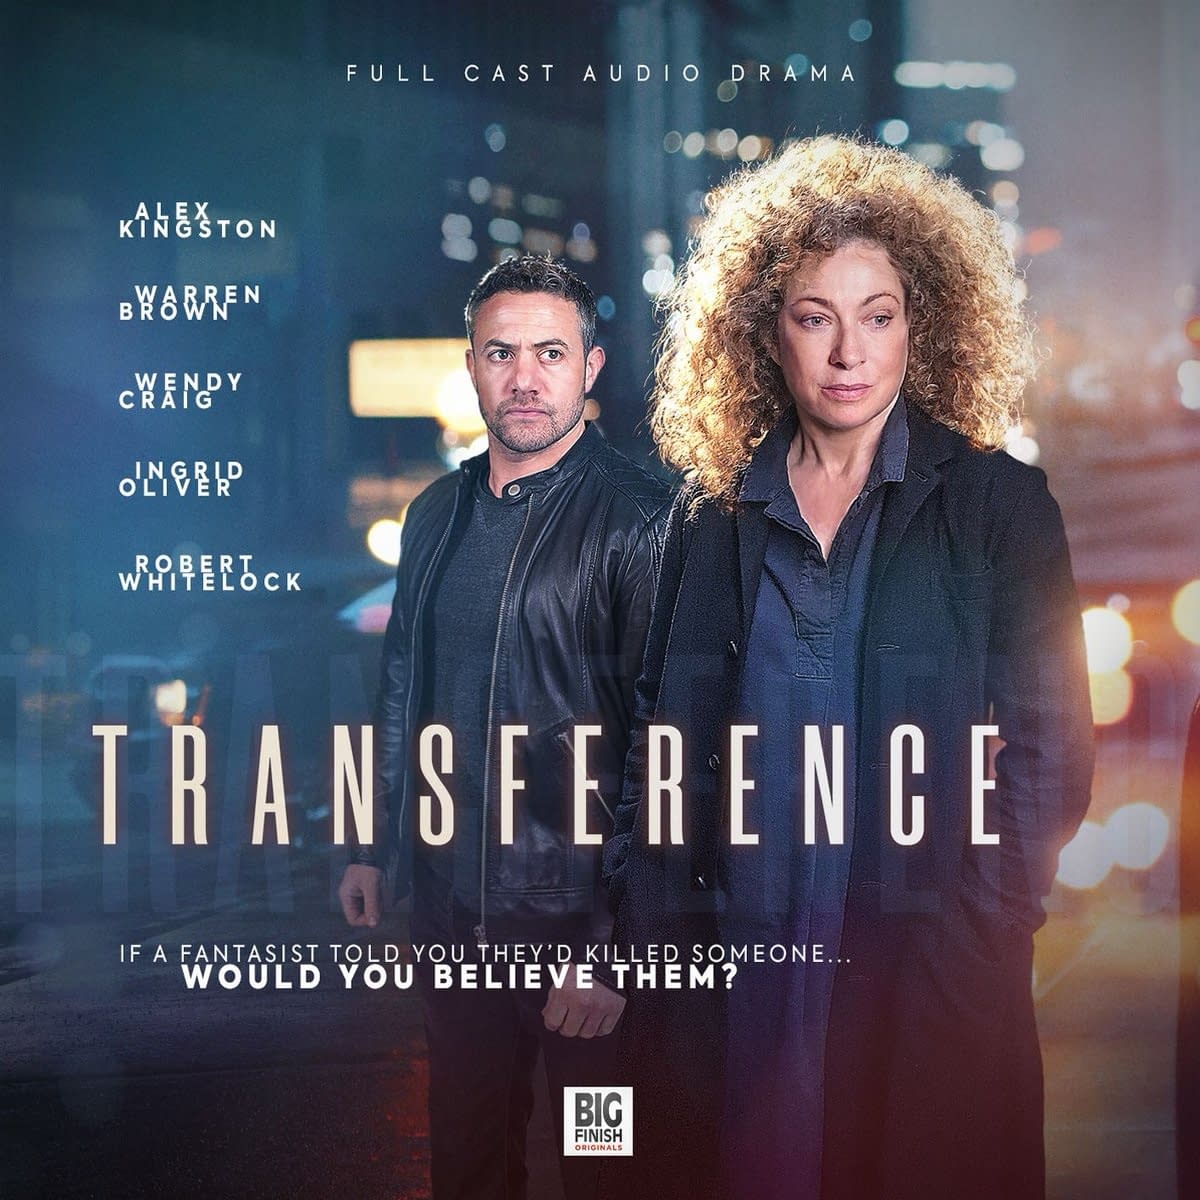 "Transference": Alex Kingston Audio Thriller a Fun but Flawed Hitchcockian Effort [SPOILER REVIEW]